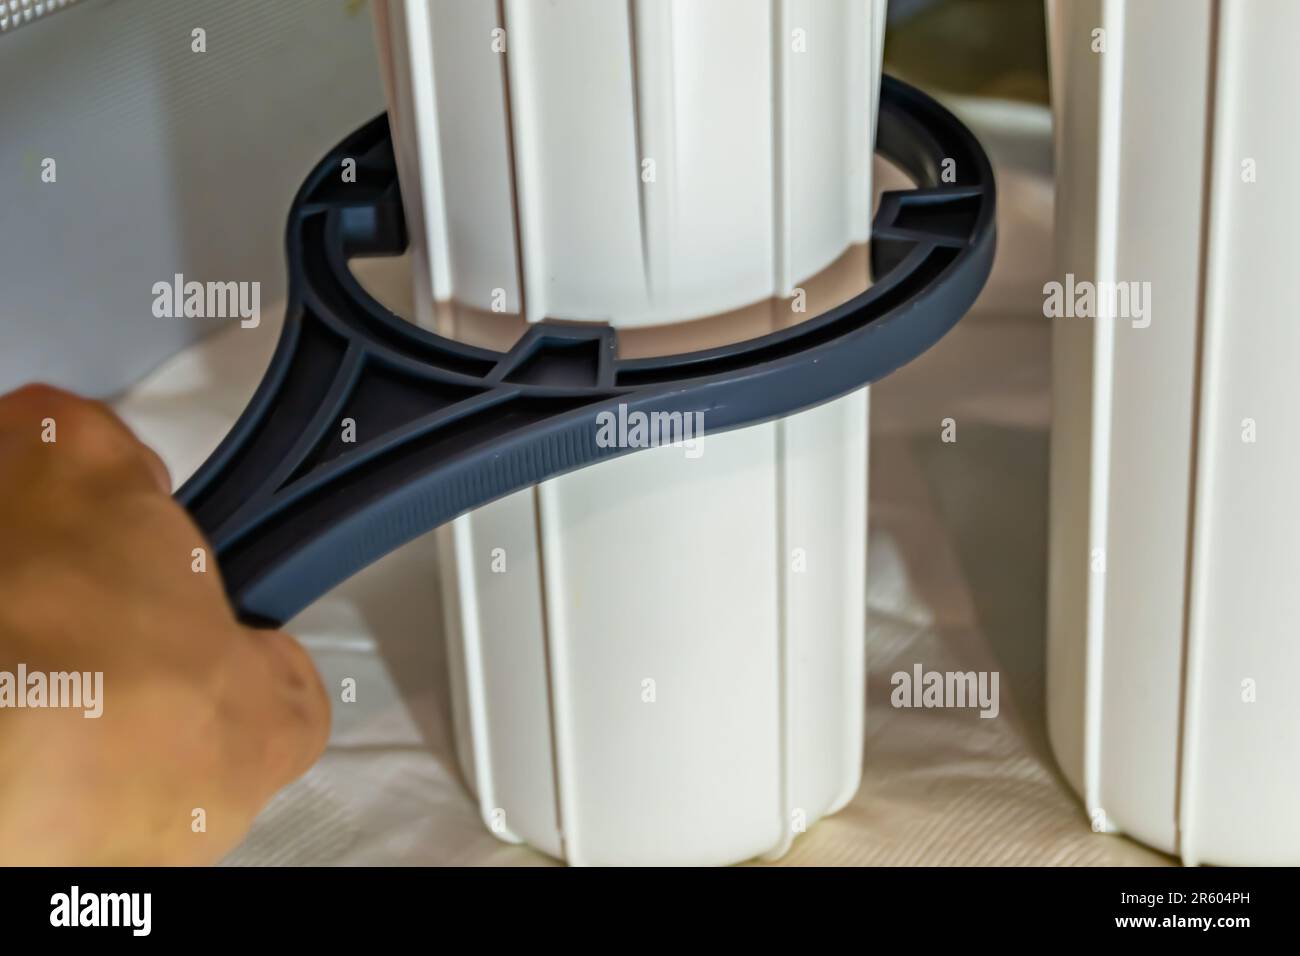 Photography to theme water filter cartridge for home on background kitchen, photo consisting of installing water filter cartridge to home, replacement Stock Photo